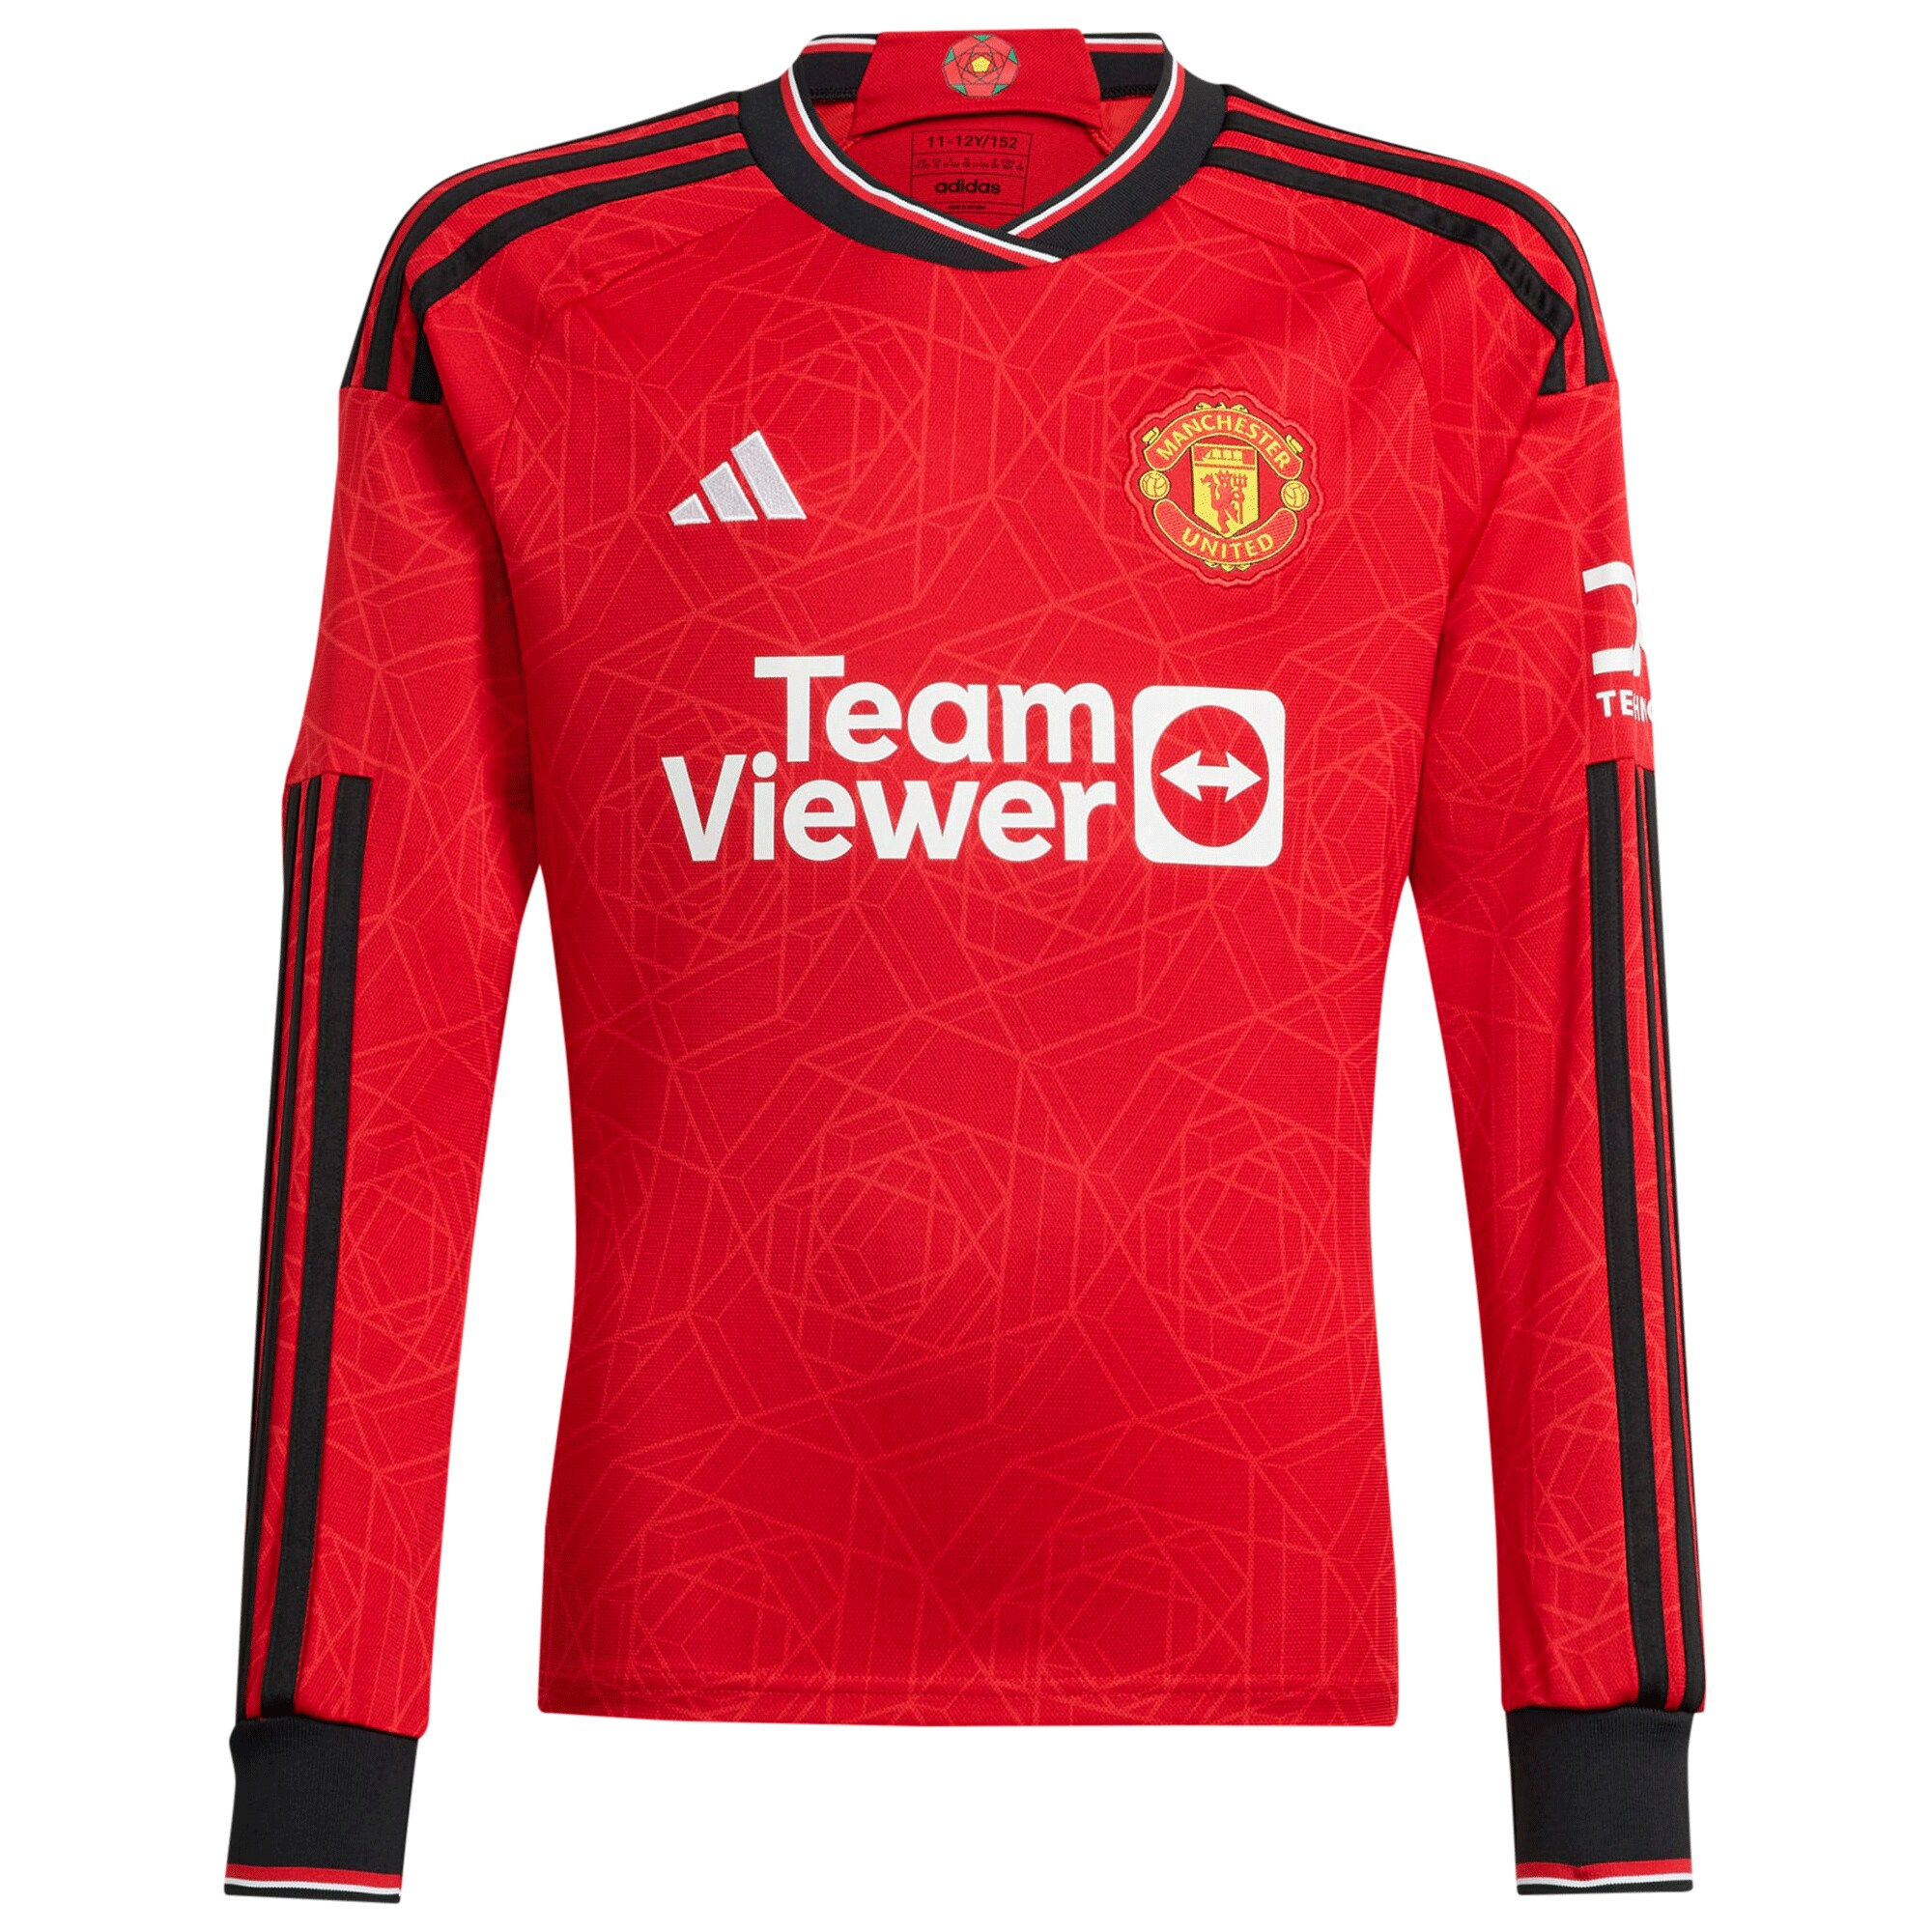 Manchester United Cup Home Shirt 2023-24 Long Sleeve with Reguilón 15 printing